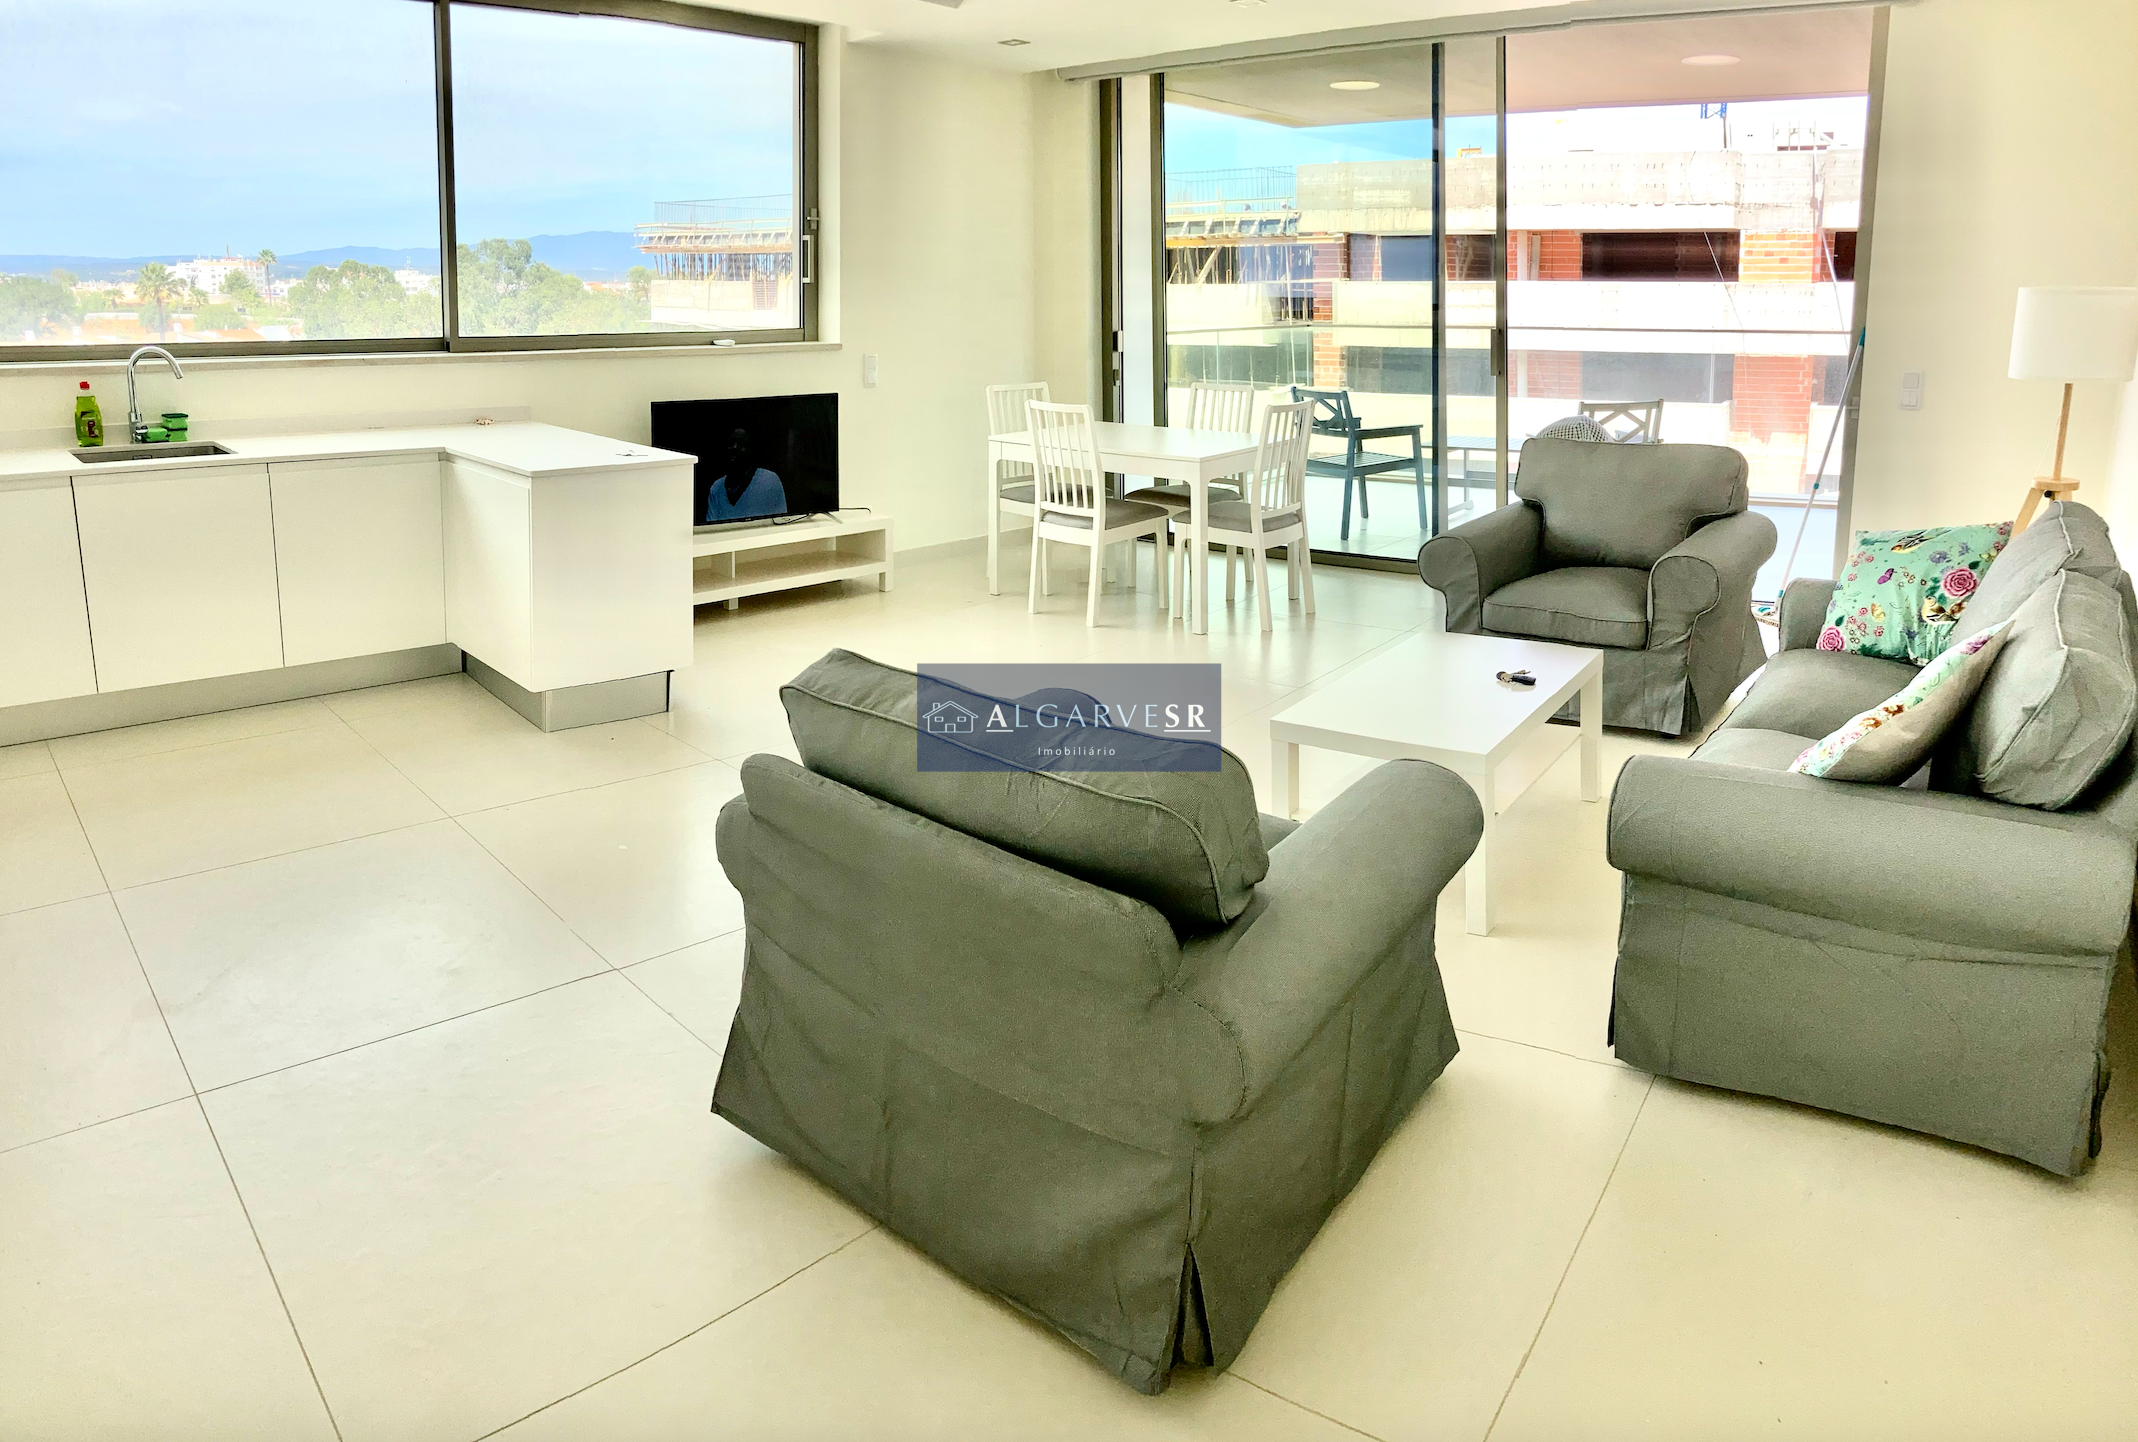 Lagos - Fabulous two bedroom apartment, Heated Rooftop Pool